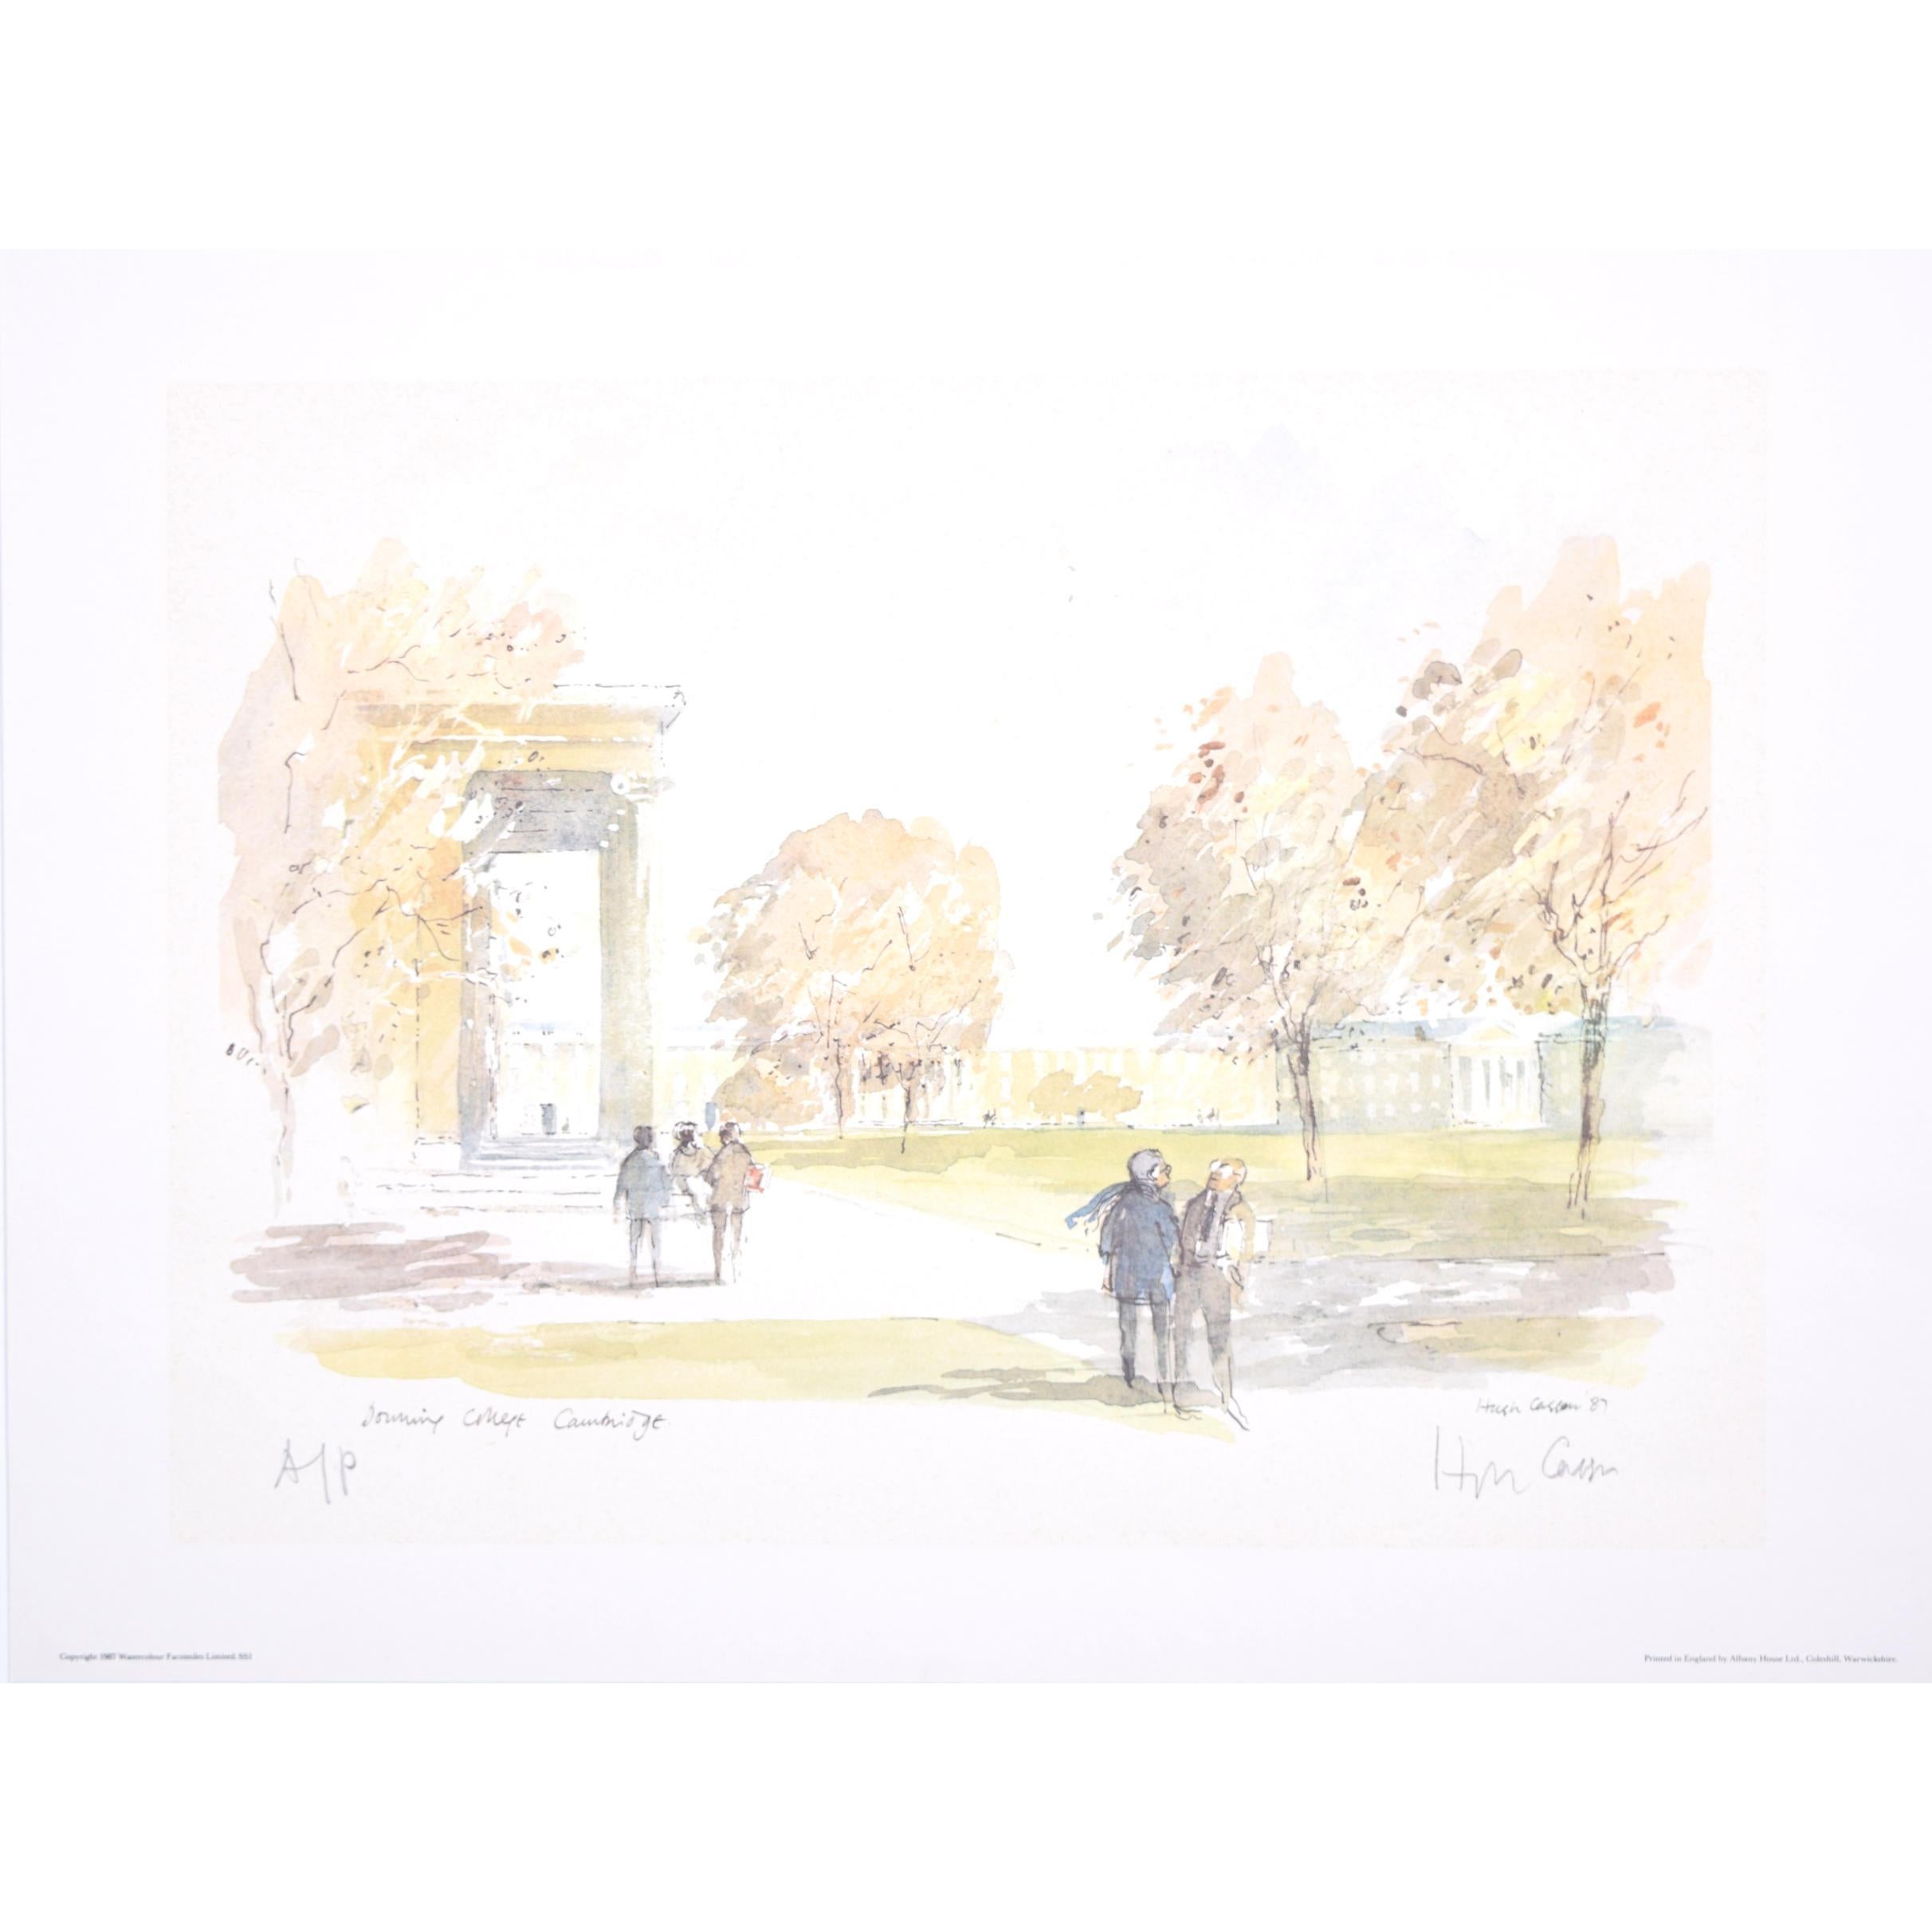 To see our other views of Oxford and Cambridge, scroll down to "More from this Seller" and below it click on "See all from this seller" - or send us a message if you cannot find the view you want.

Hugh Casson (1910 - 1999)
Downing College,